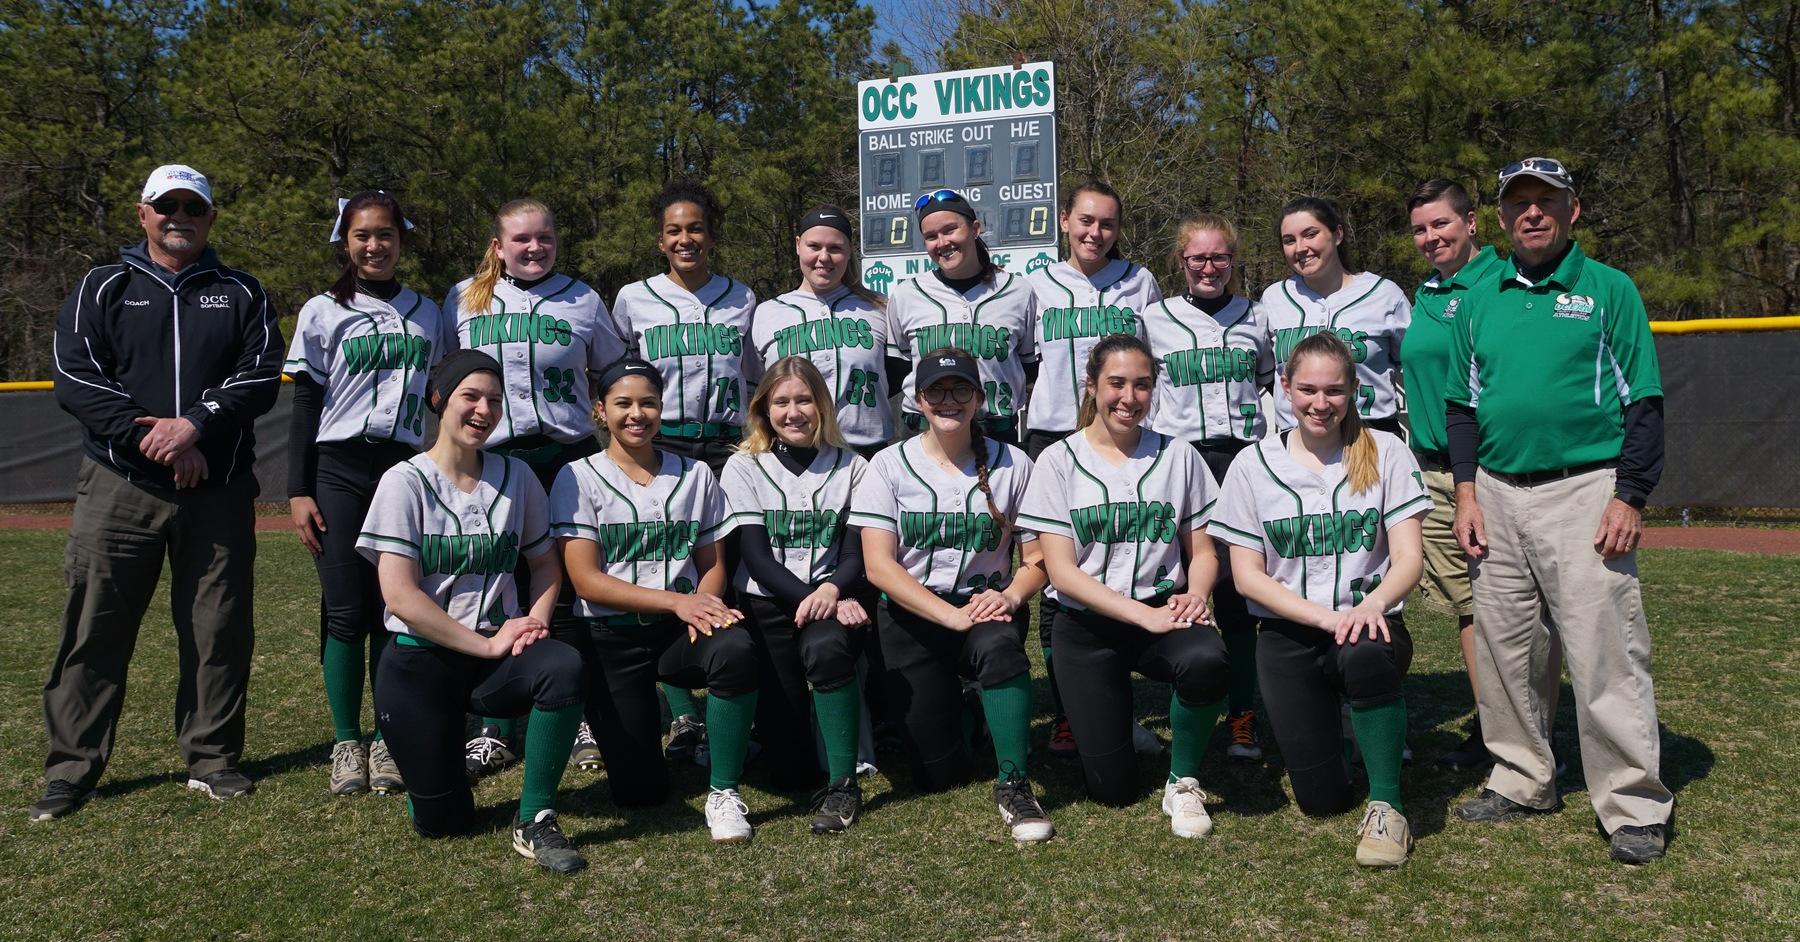 Dries Pitches Two Shutouts as OCC Softball Sweeps Montgomery CCC